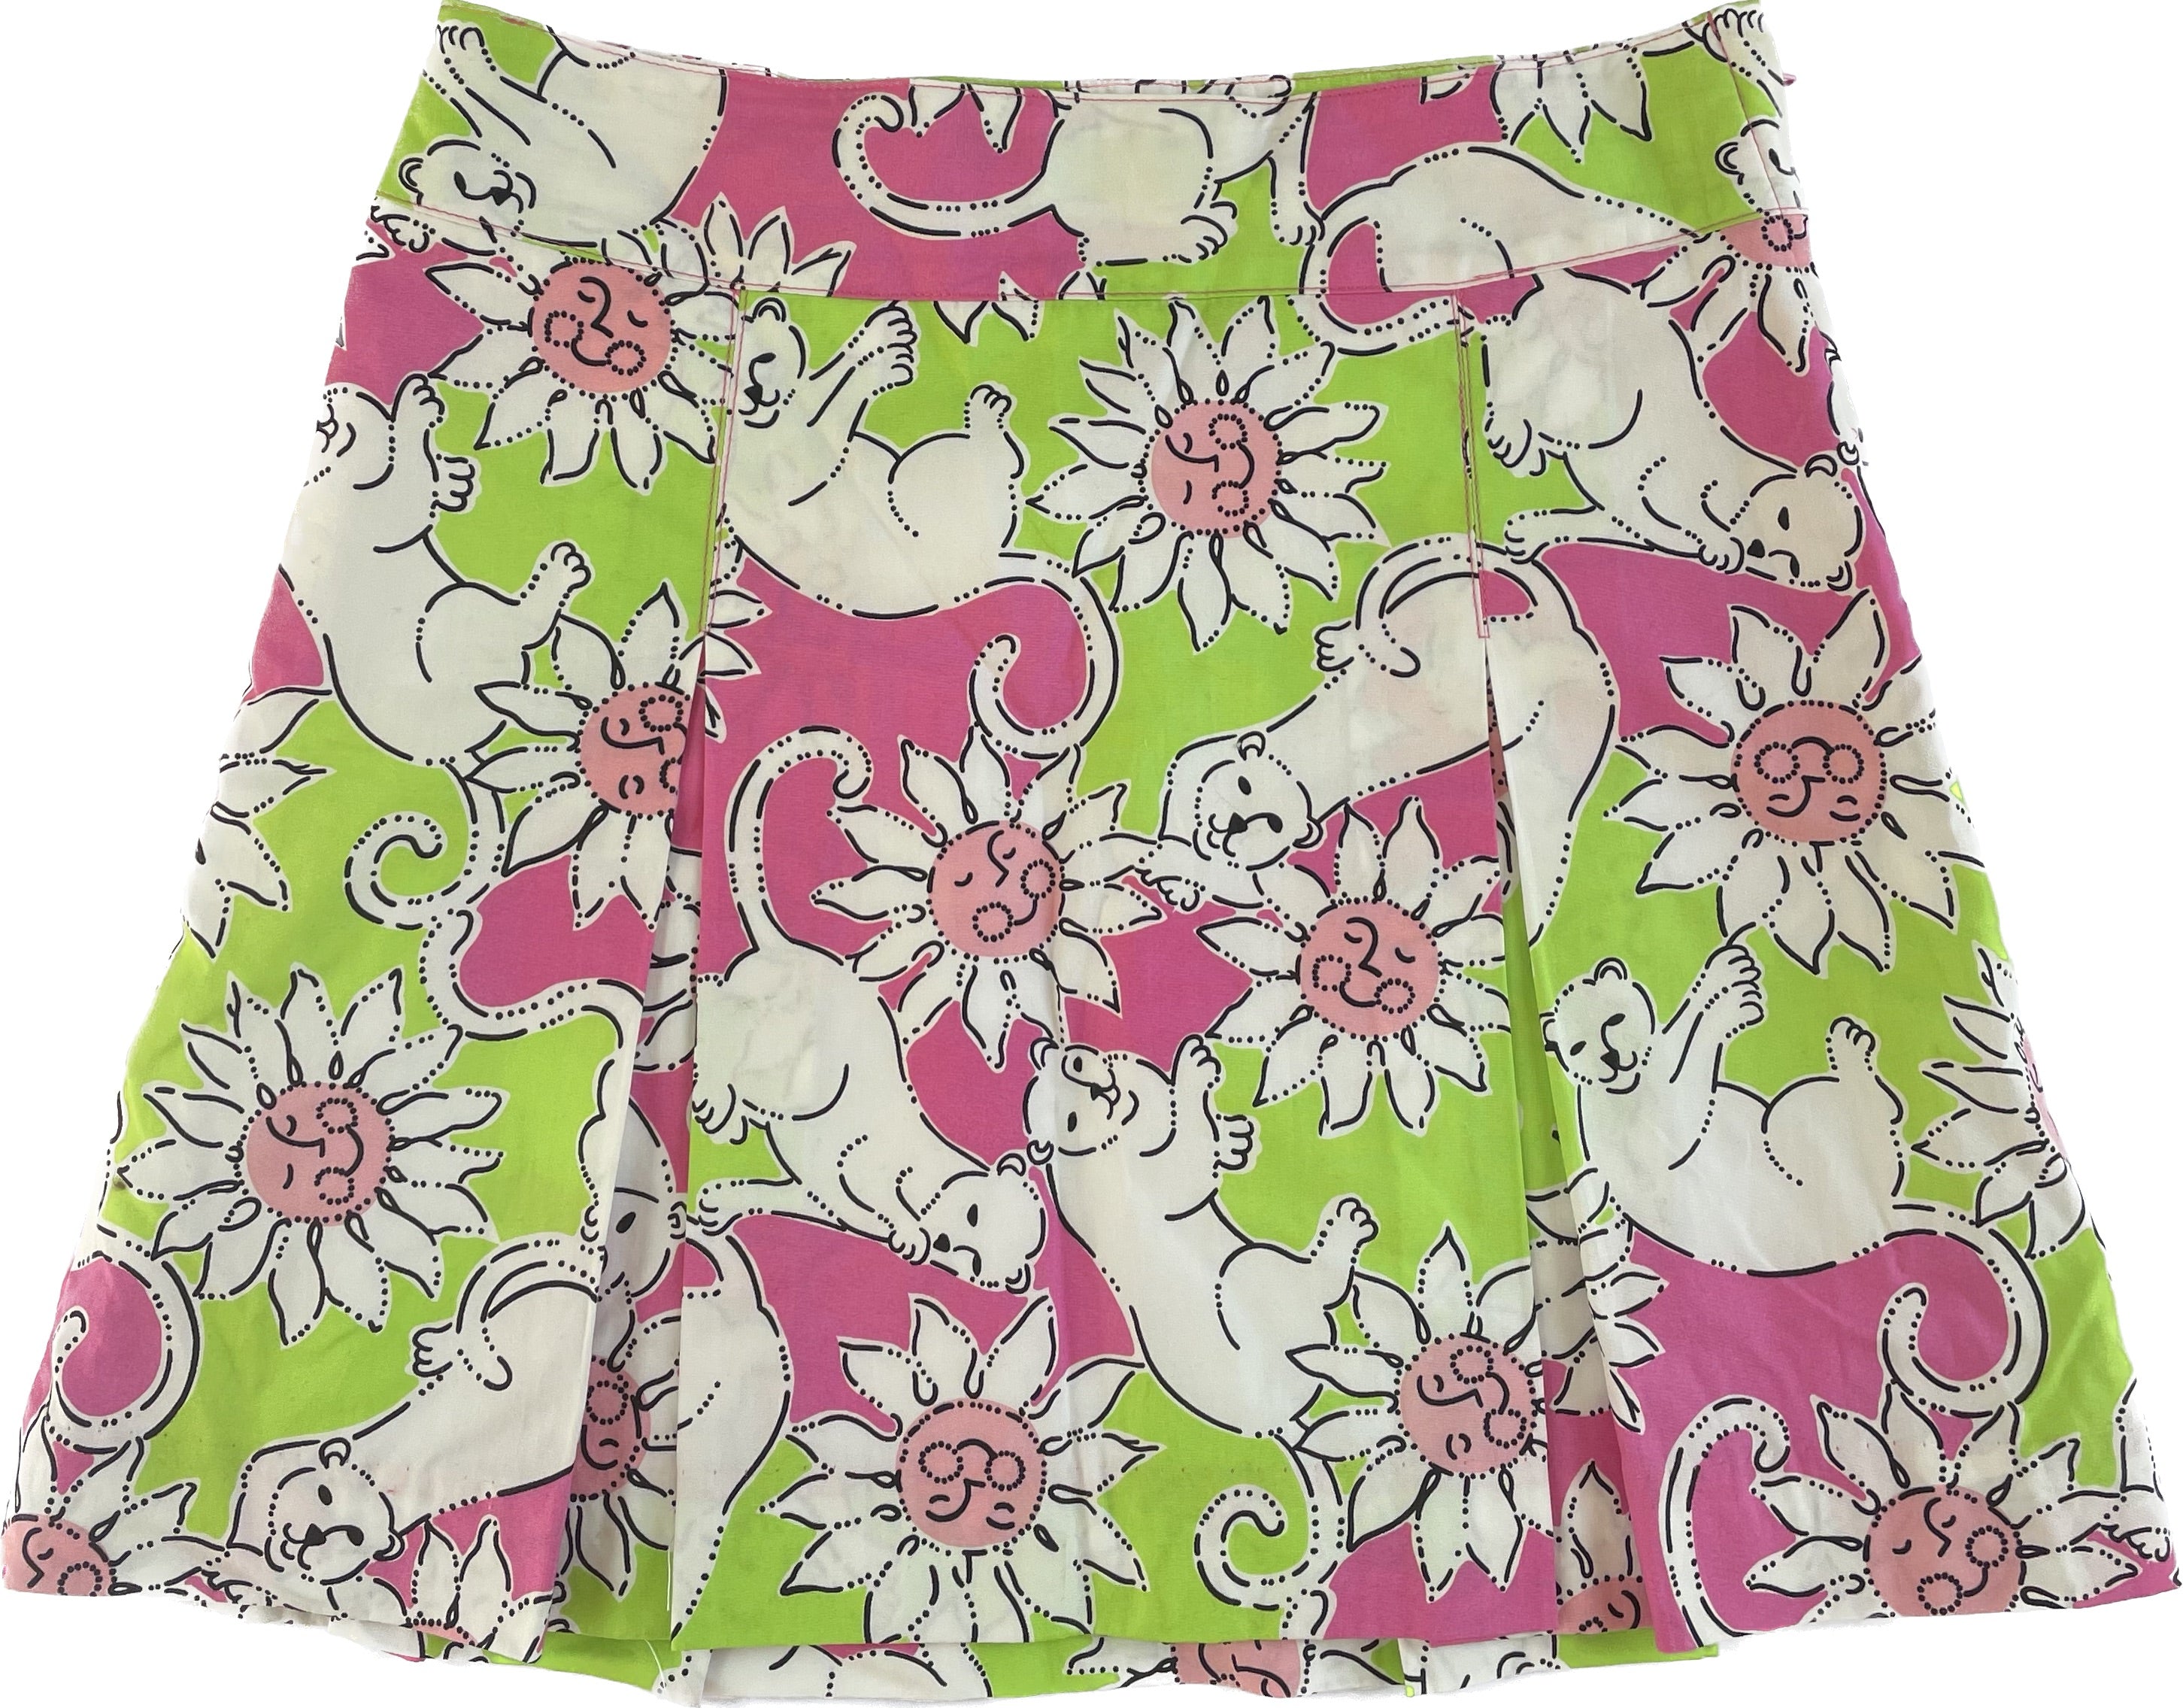 Lilly Pulitzer Skirt, Green/Pink Girls Size 10